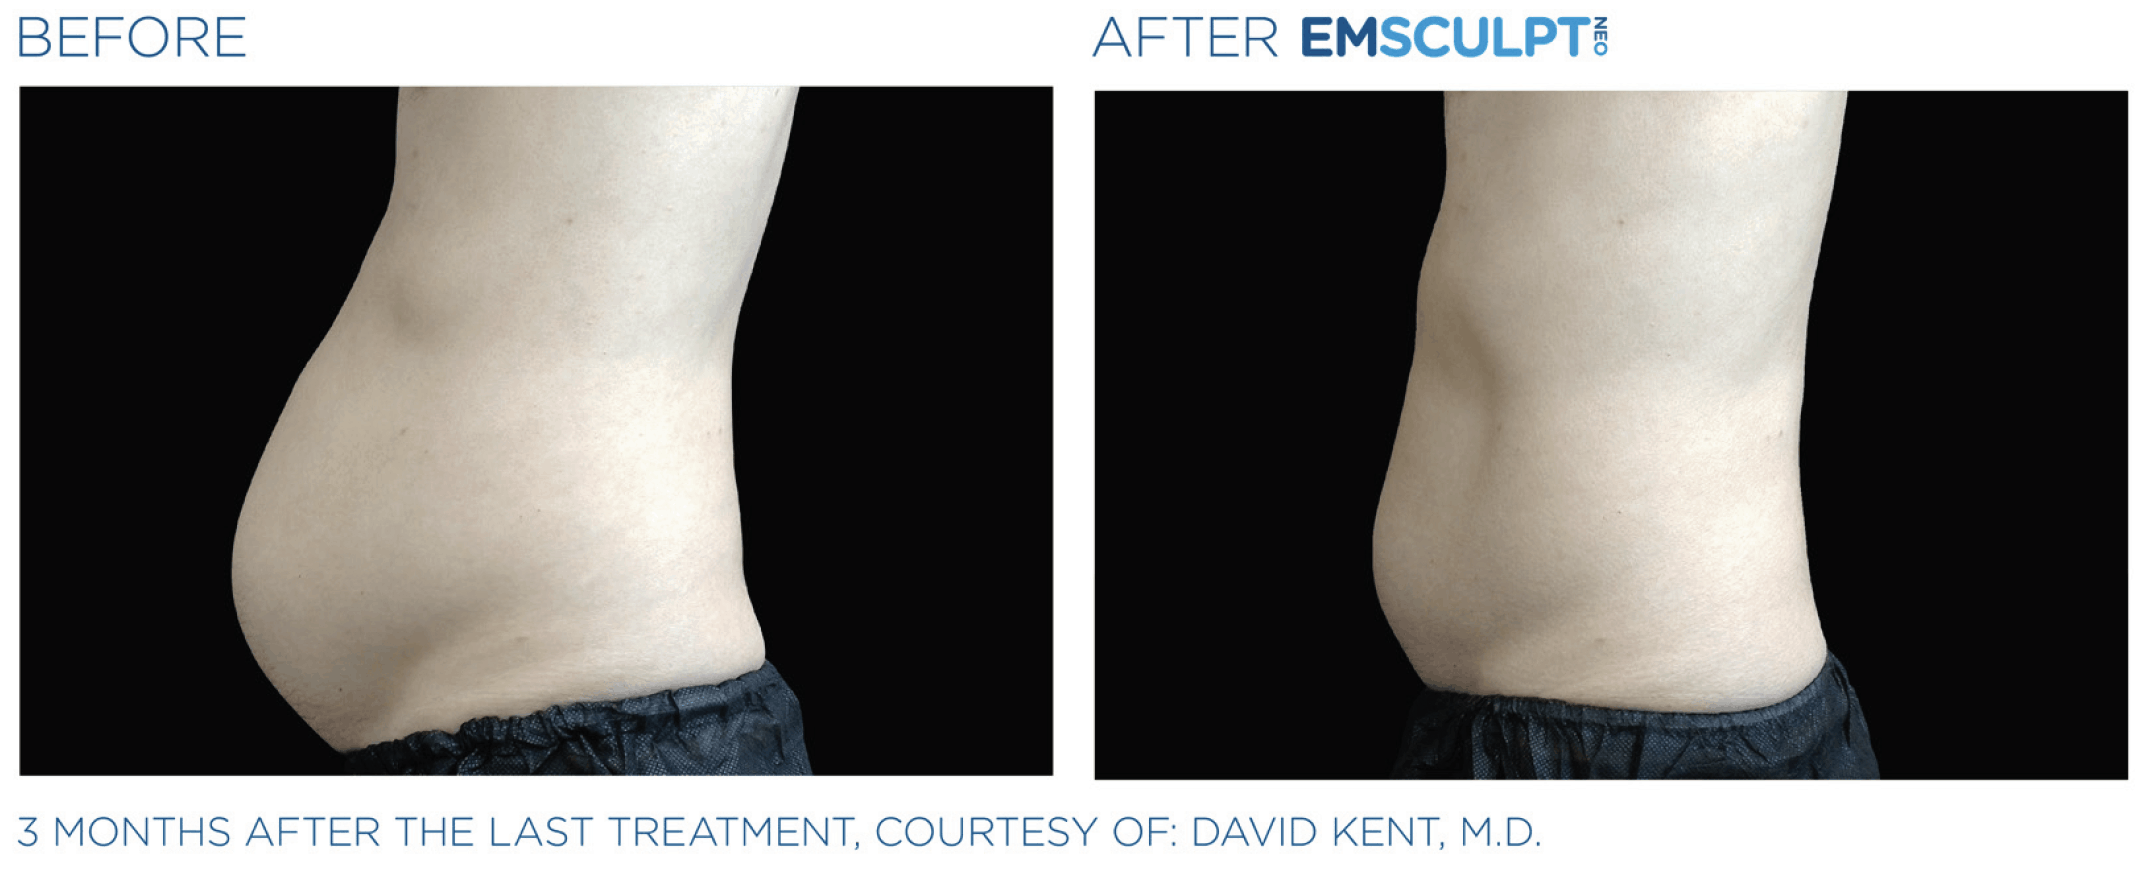 A dramatic transformation captured in a before and after photo of a tummy tuck complemented by Emsculpt Neo technology.